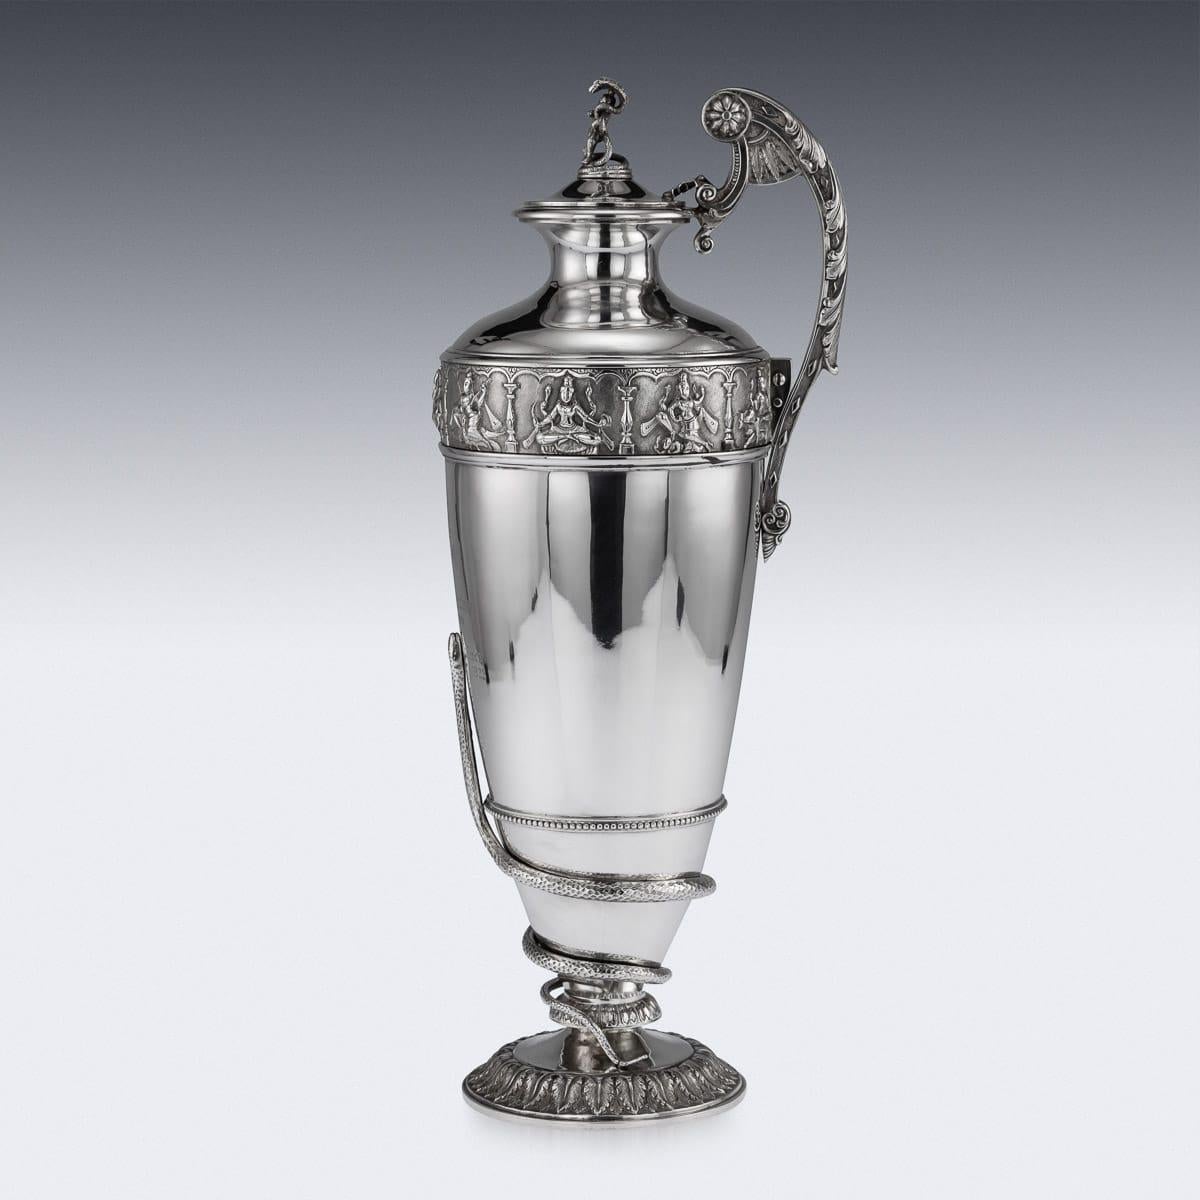 Antique early-20th Century Indian Colonial solid silver regimental (28th Regiment) commemorative wine ewer, the top band is beautifully chased and repousse' decorated depicting Hindu gods and goddesses in elaborate cartooches, and the bottom applied